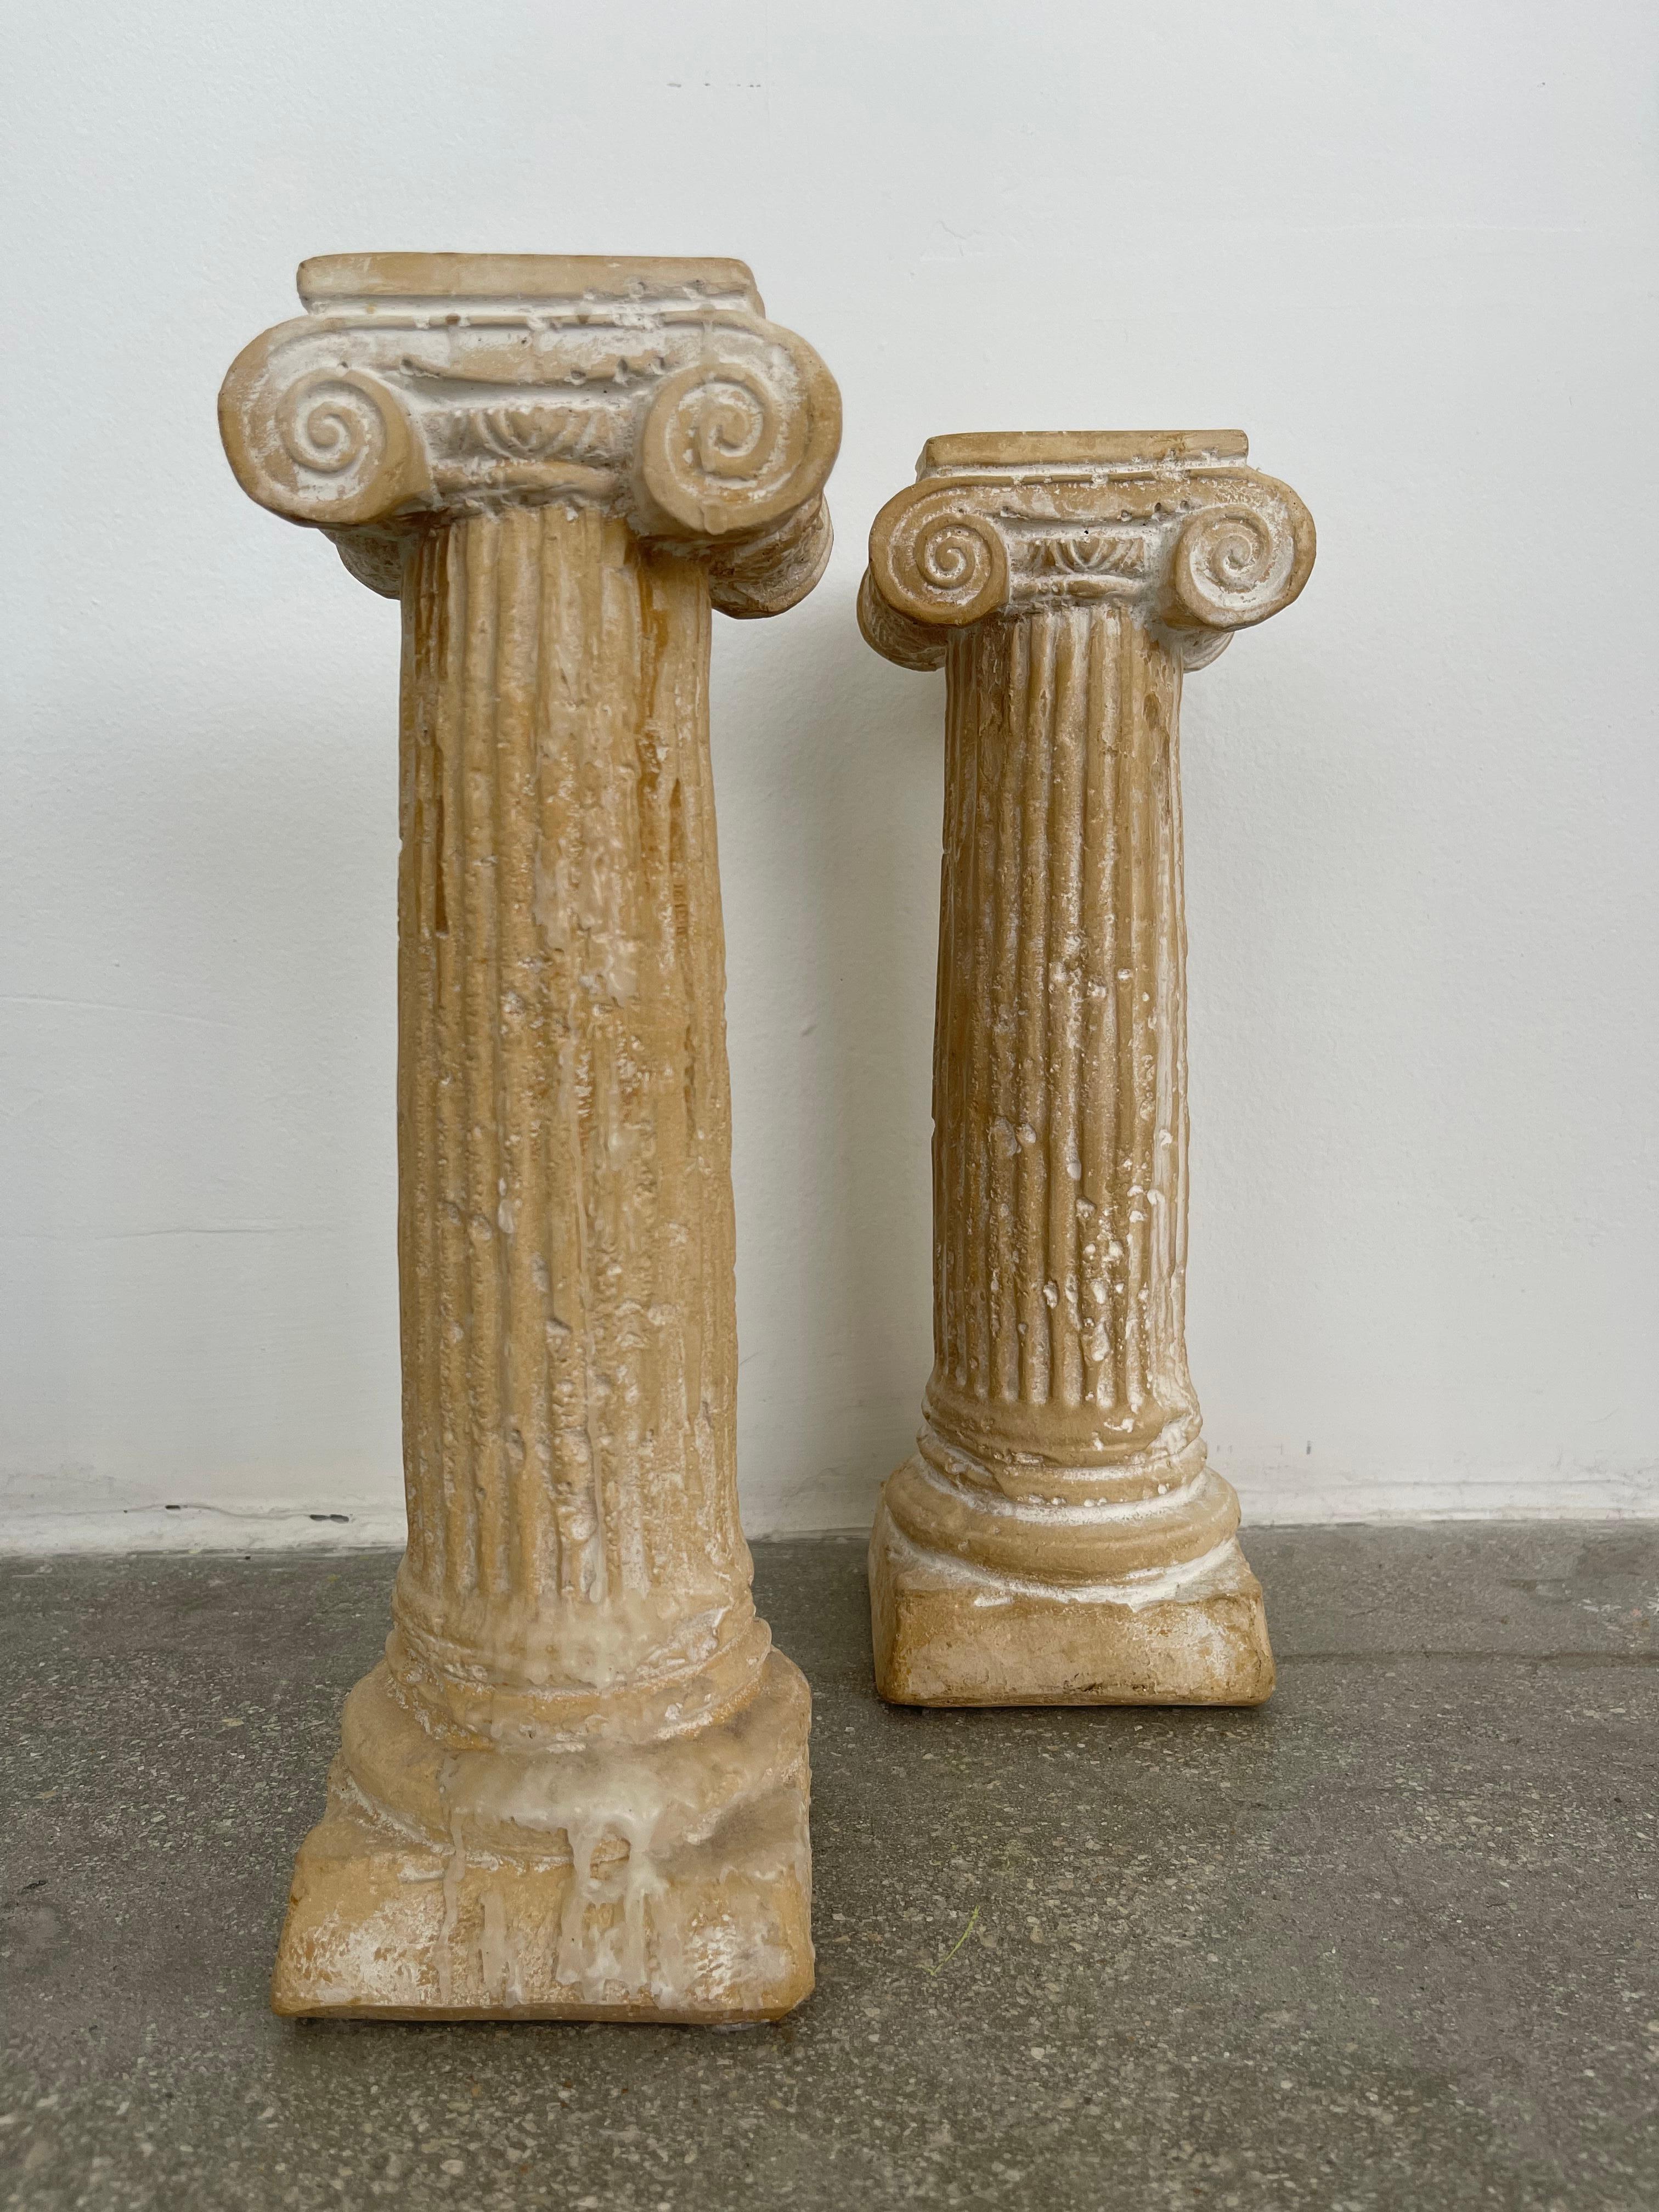 20th century Roman column candlestick Holders made out of plaster. Perfect statement pieces for display as is or with candlesticks mounted in them.

Dimensions:
4